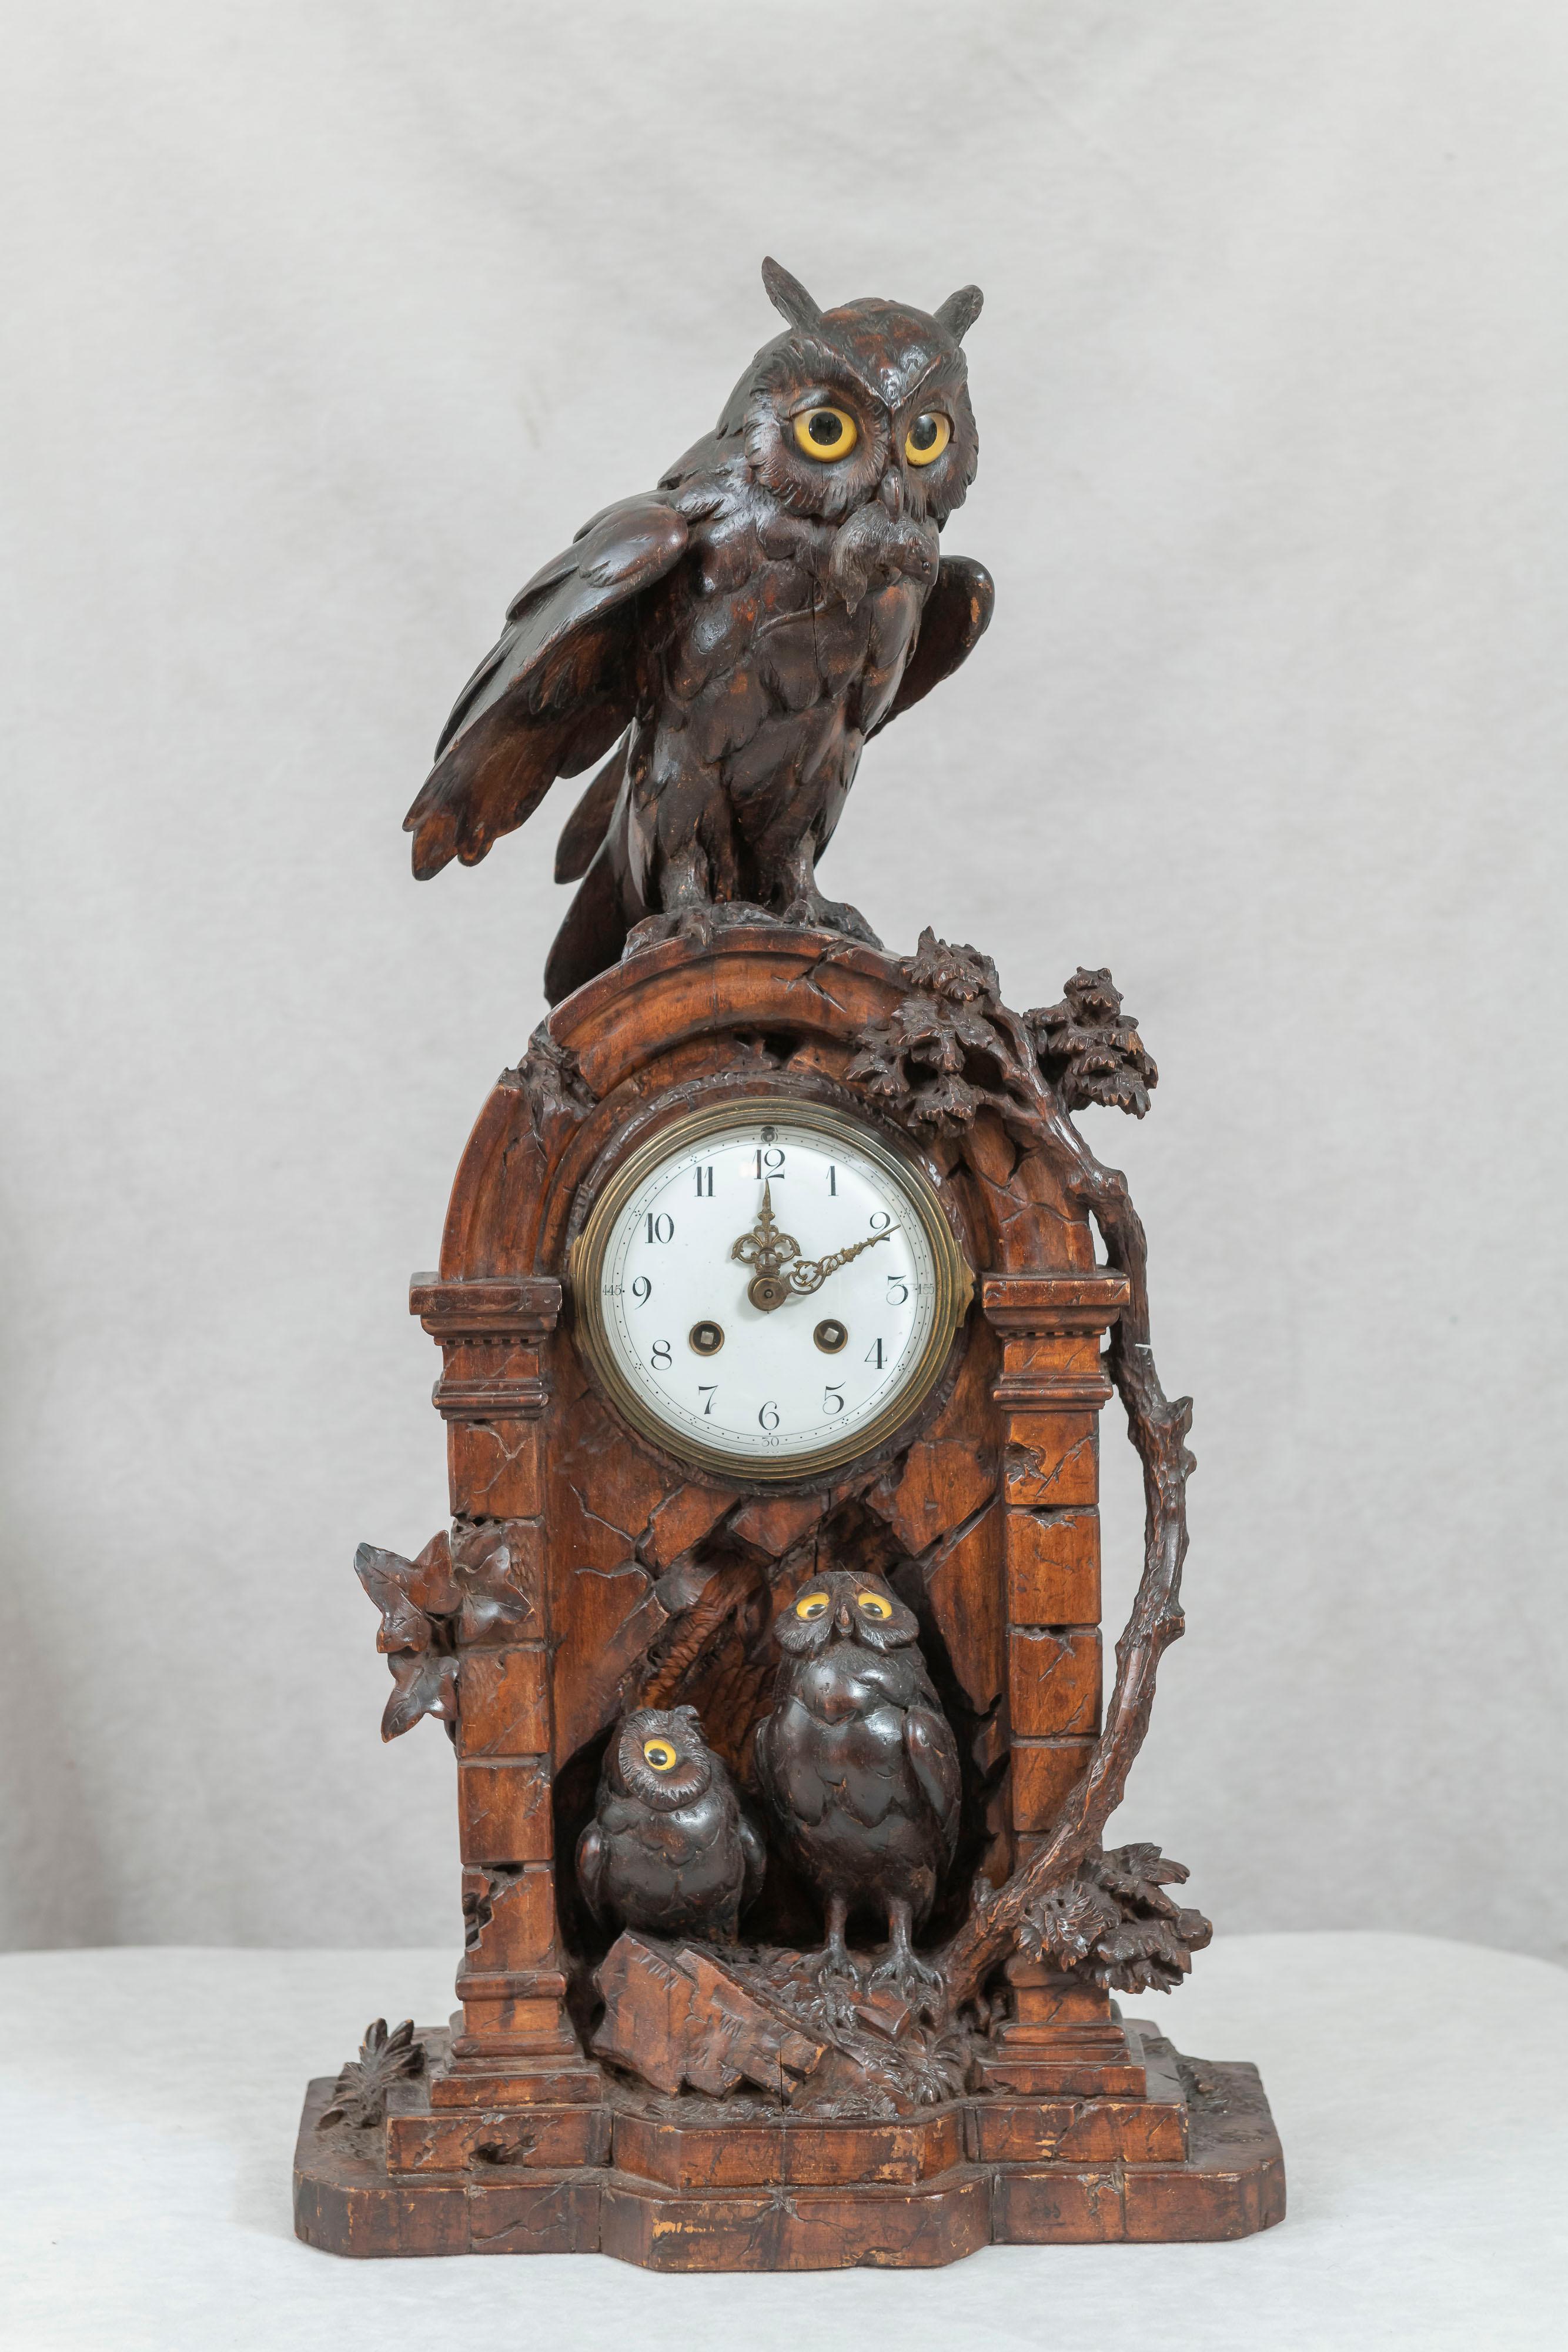 Offering here a wonderfully humorous and adorable Black Forest clock. The mother owl sits atop the clock with todays meal in her mouth as her little ones look above longing for today's chow. I can't remember seeing any Black Forest items with such